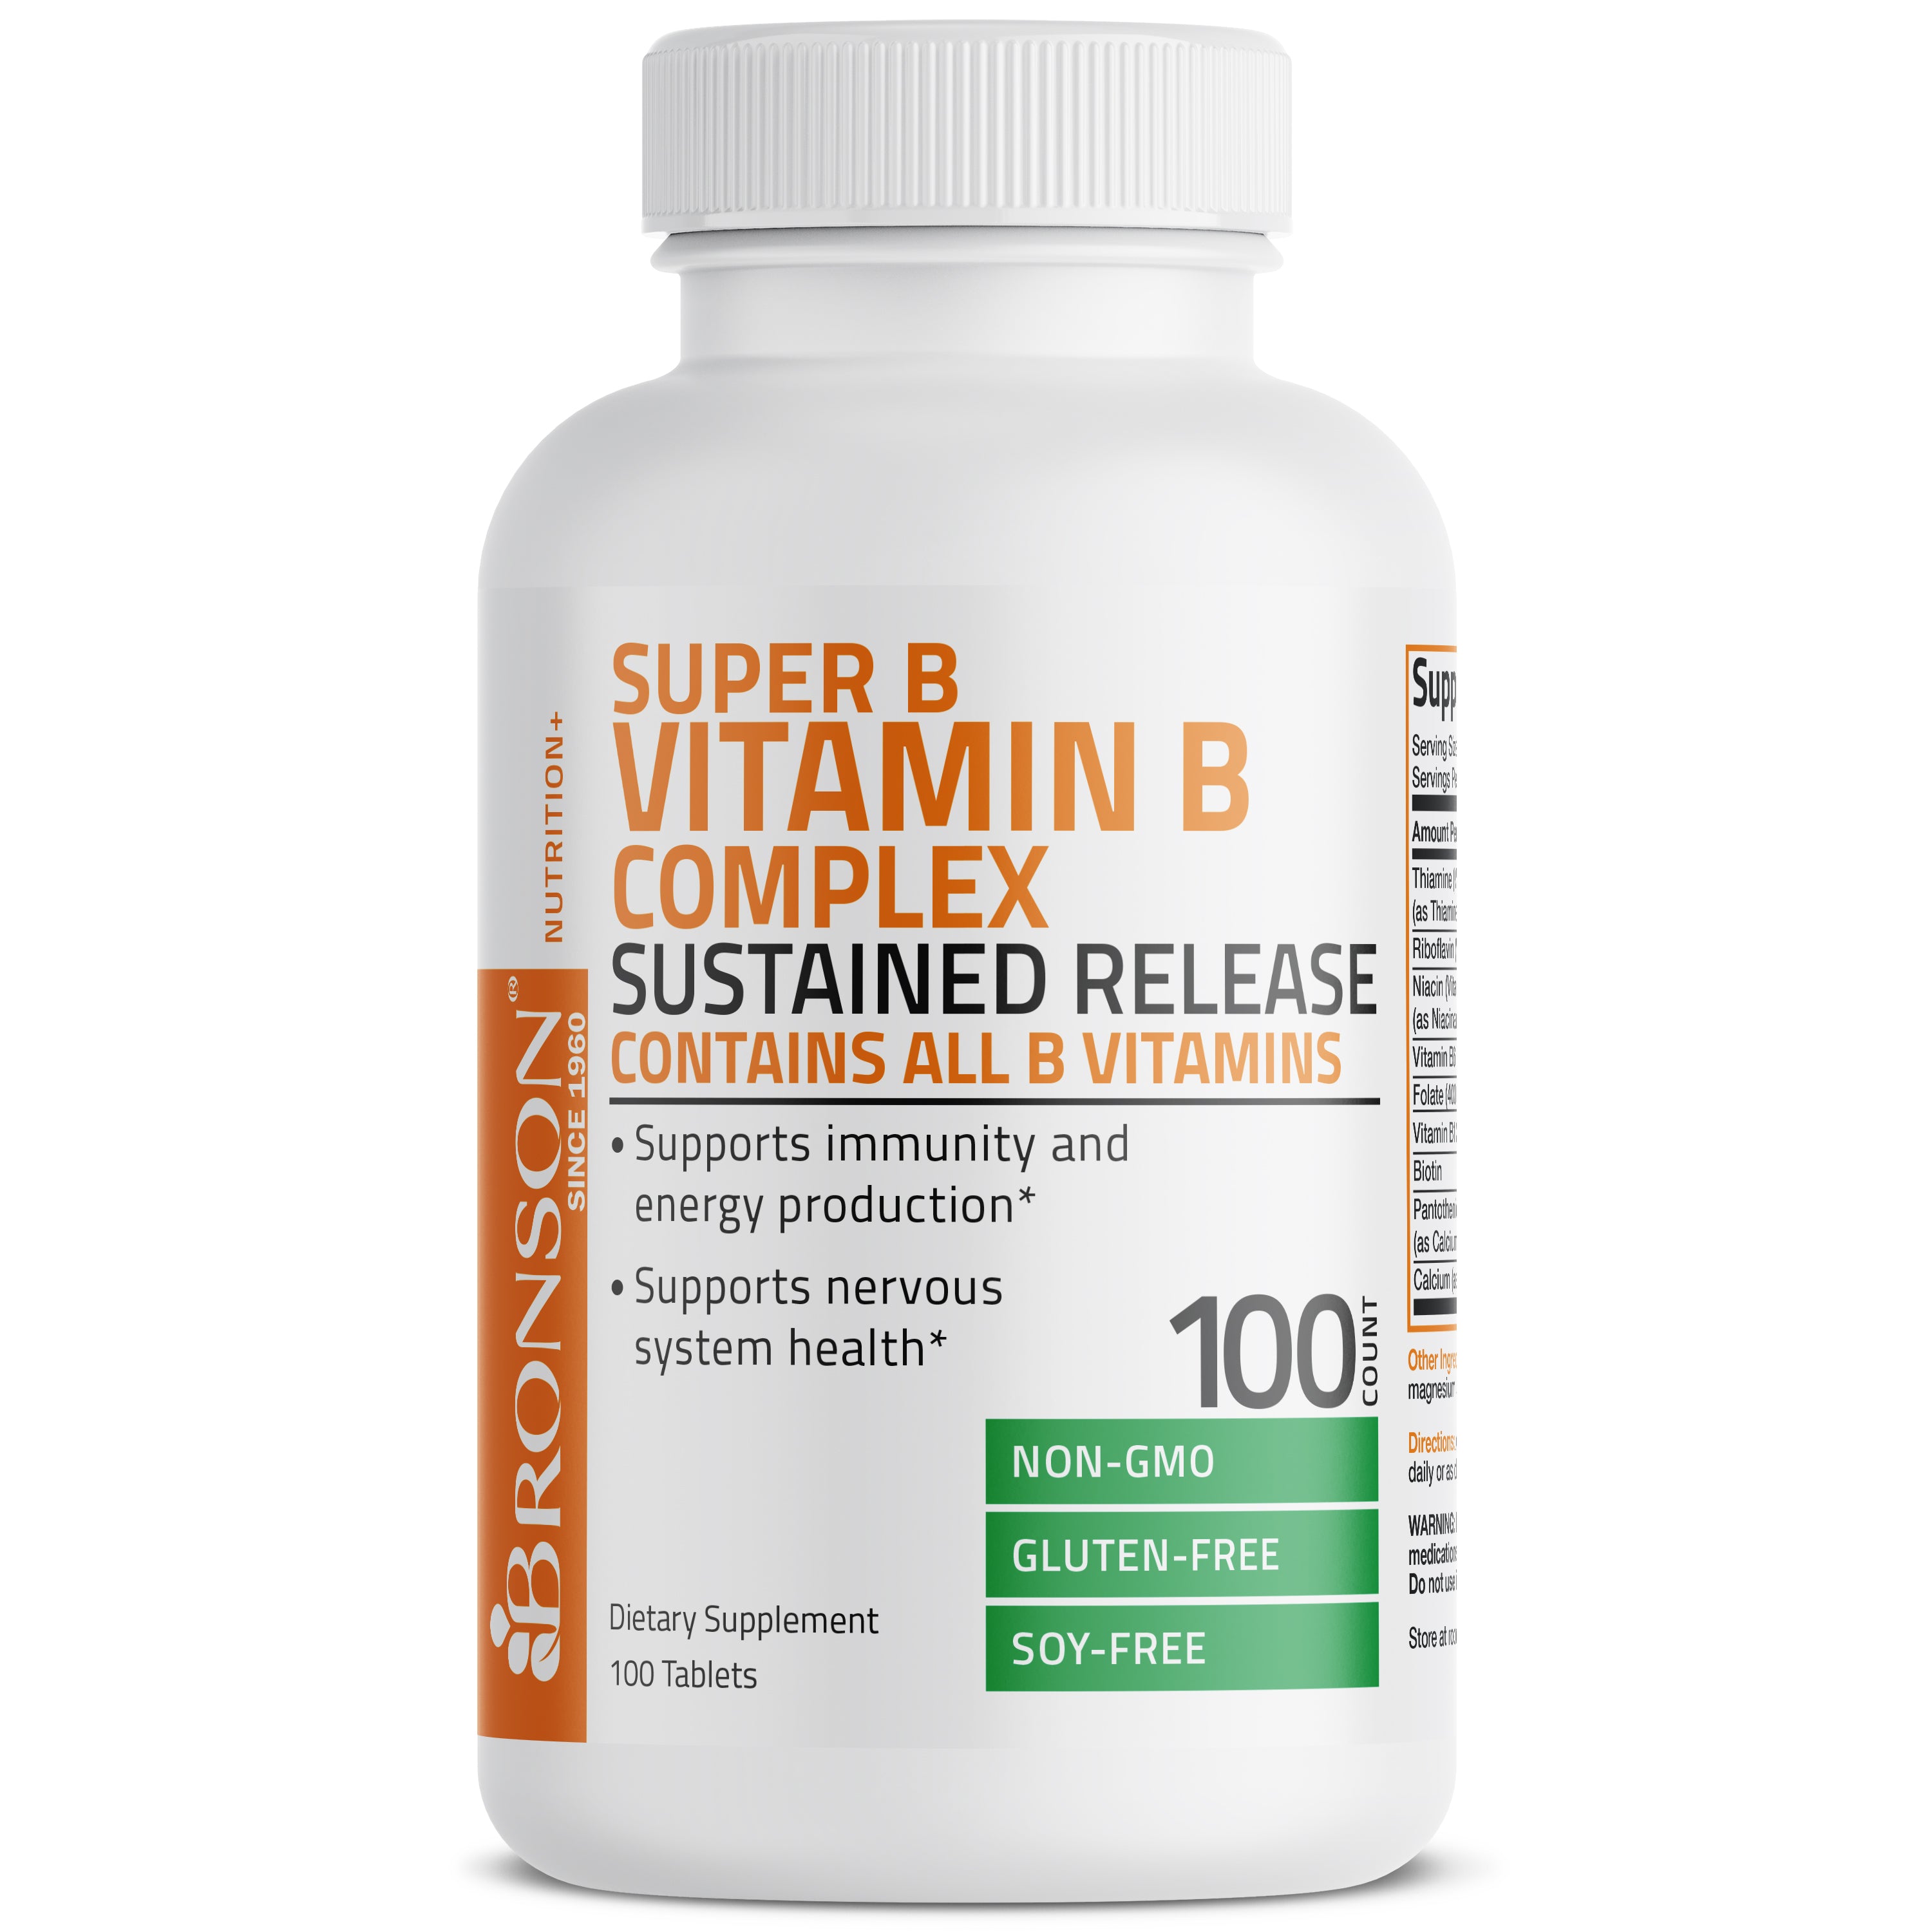 Vitamin B Complex Sustained Release view 4 of 7